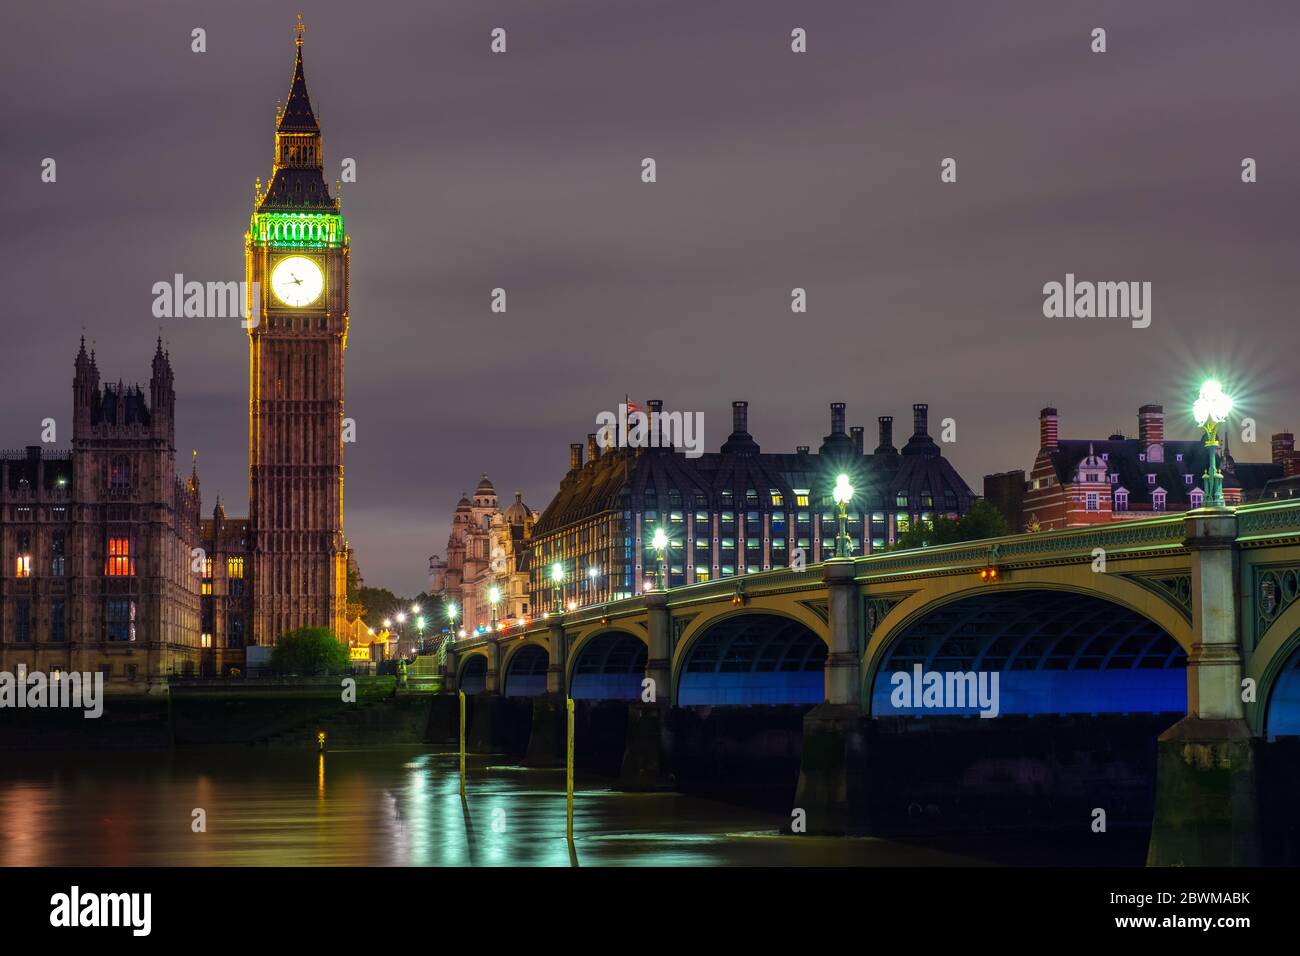 London, UK. Palace of Westminster at night with Big Ben a popular landmark in London, UK. Dark sky, reflection in the Thames river Stock Photo